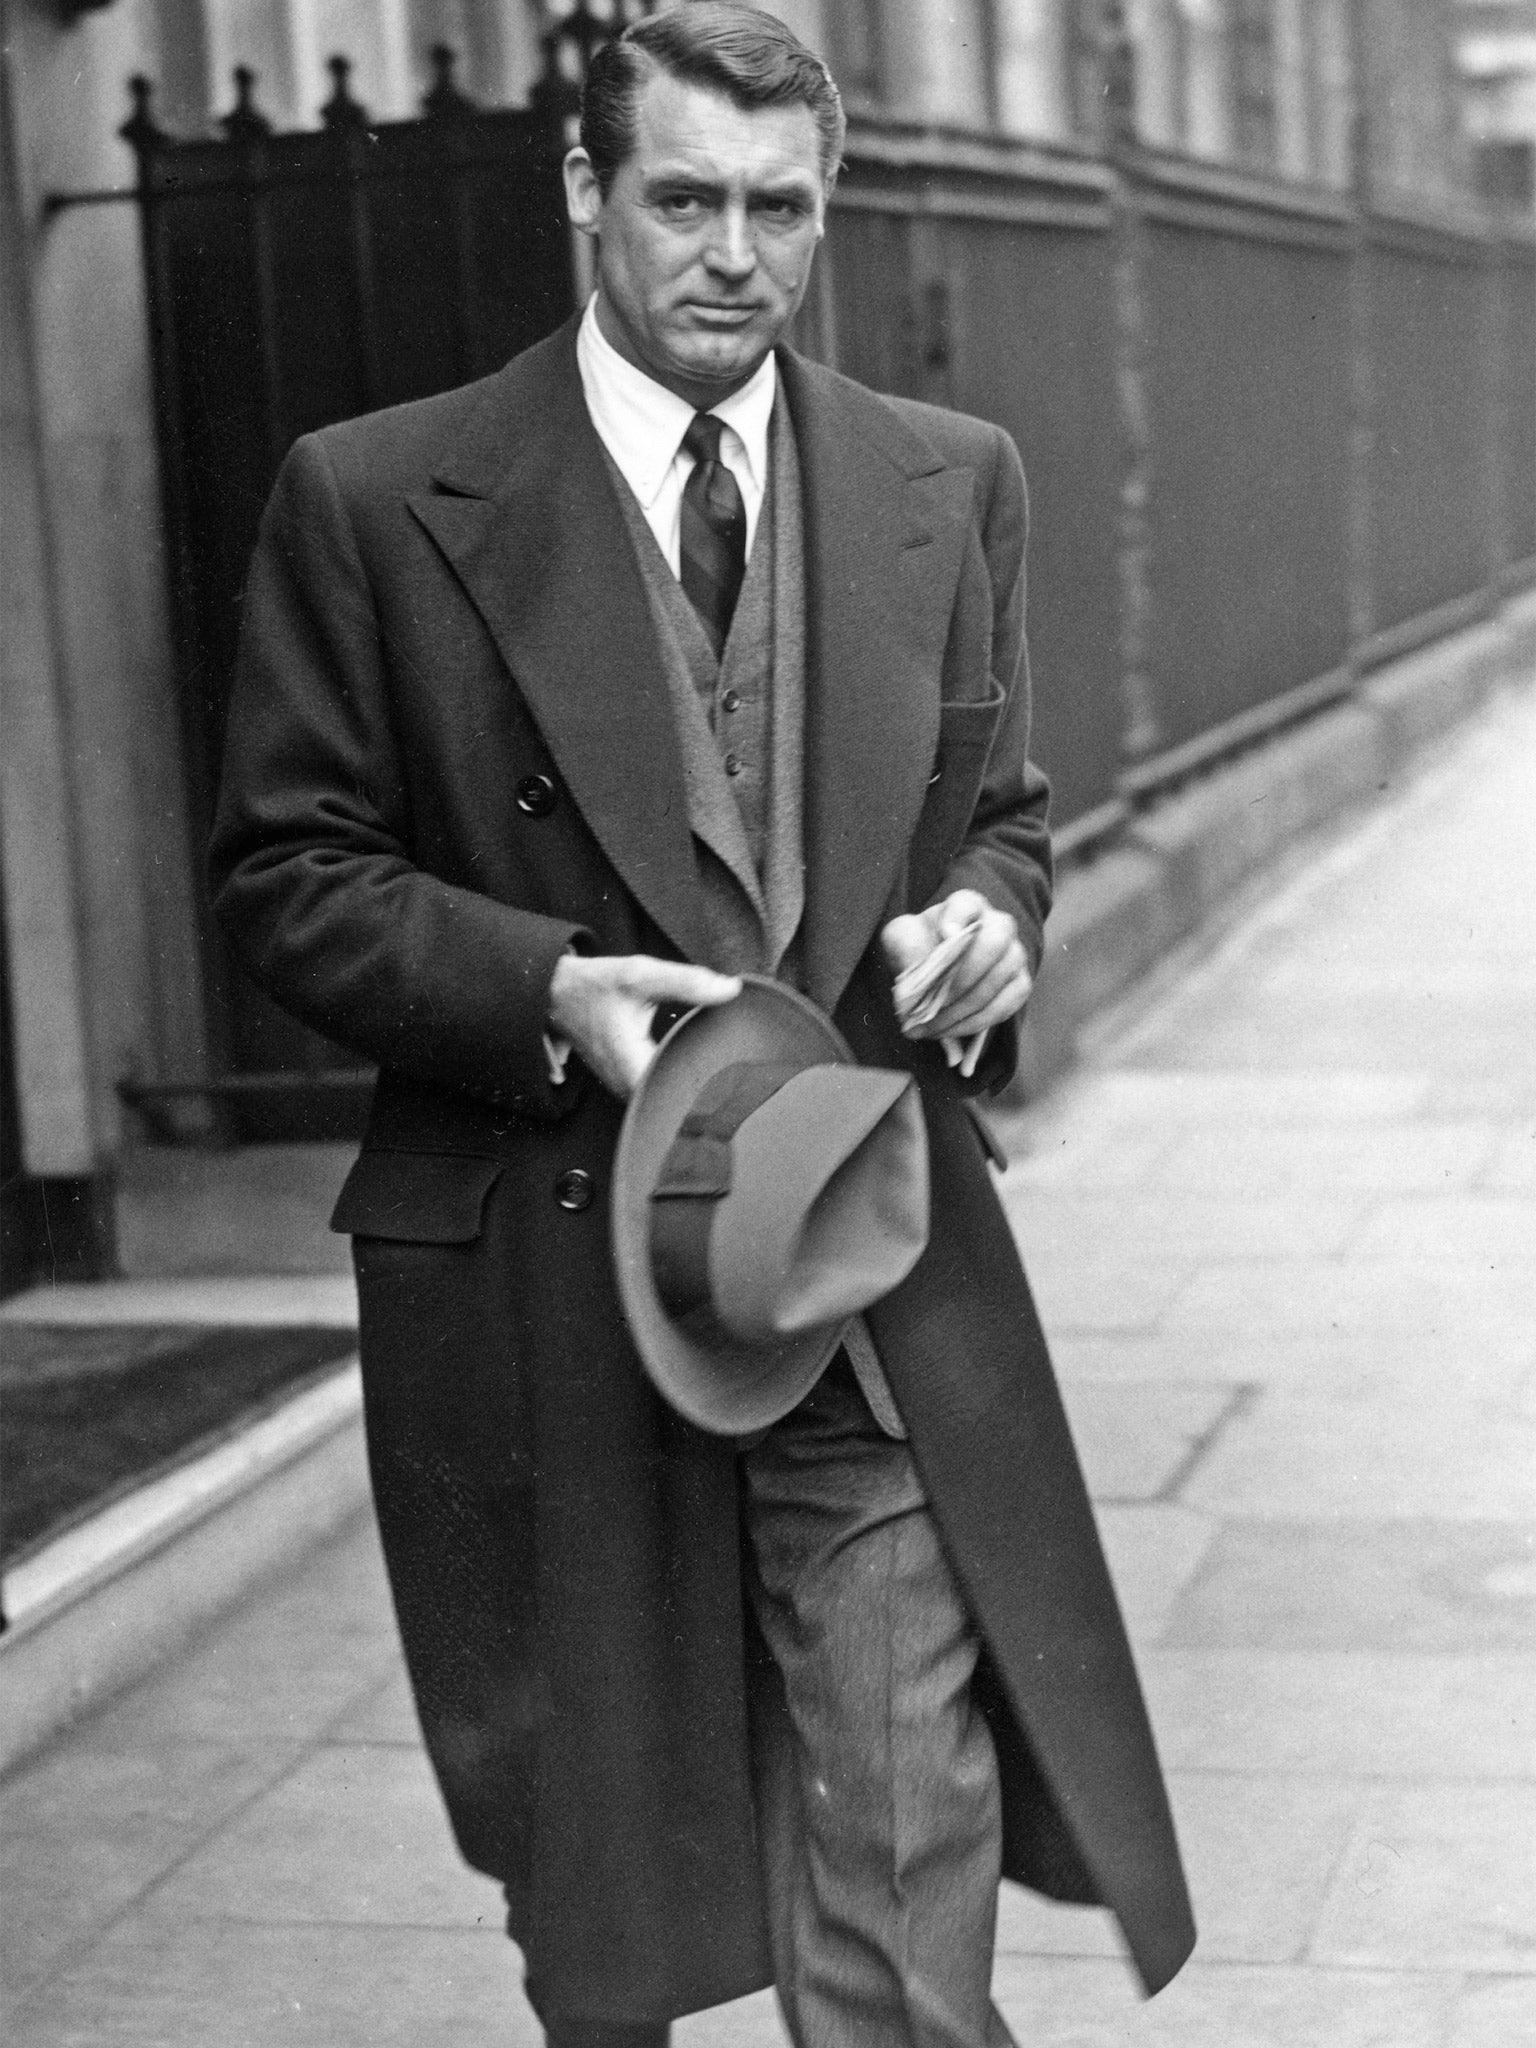 The always dapper Cary Grant